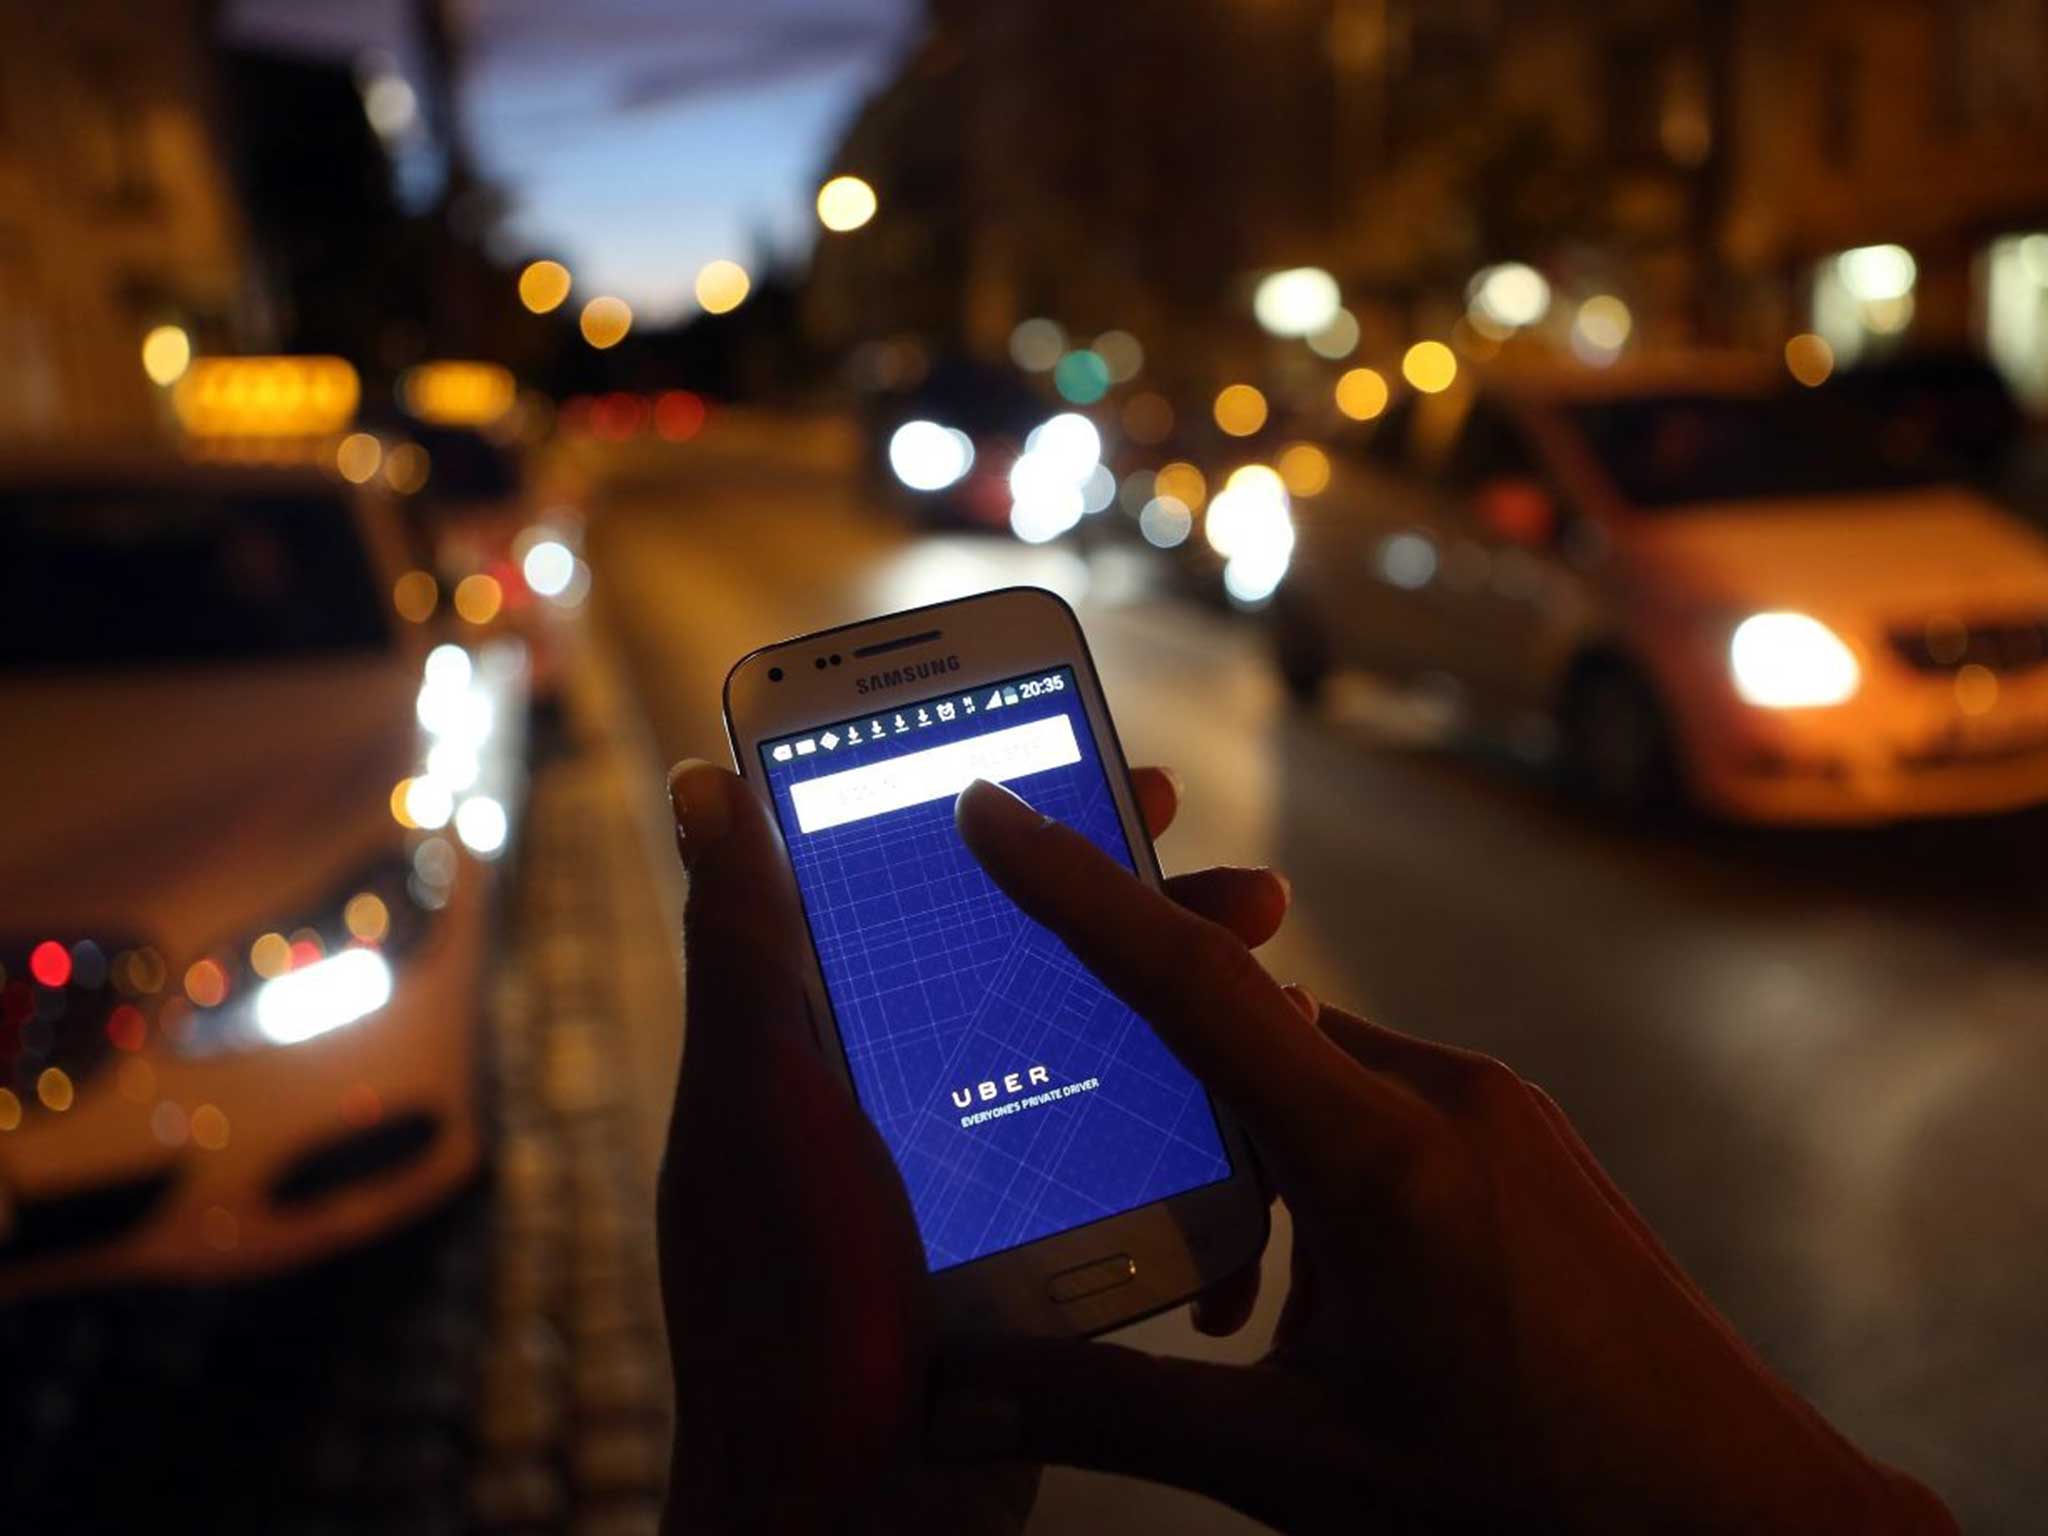 Above all things: Germany’s car-sharing UberPop app has stirred passions and a legal challenge